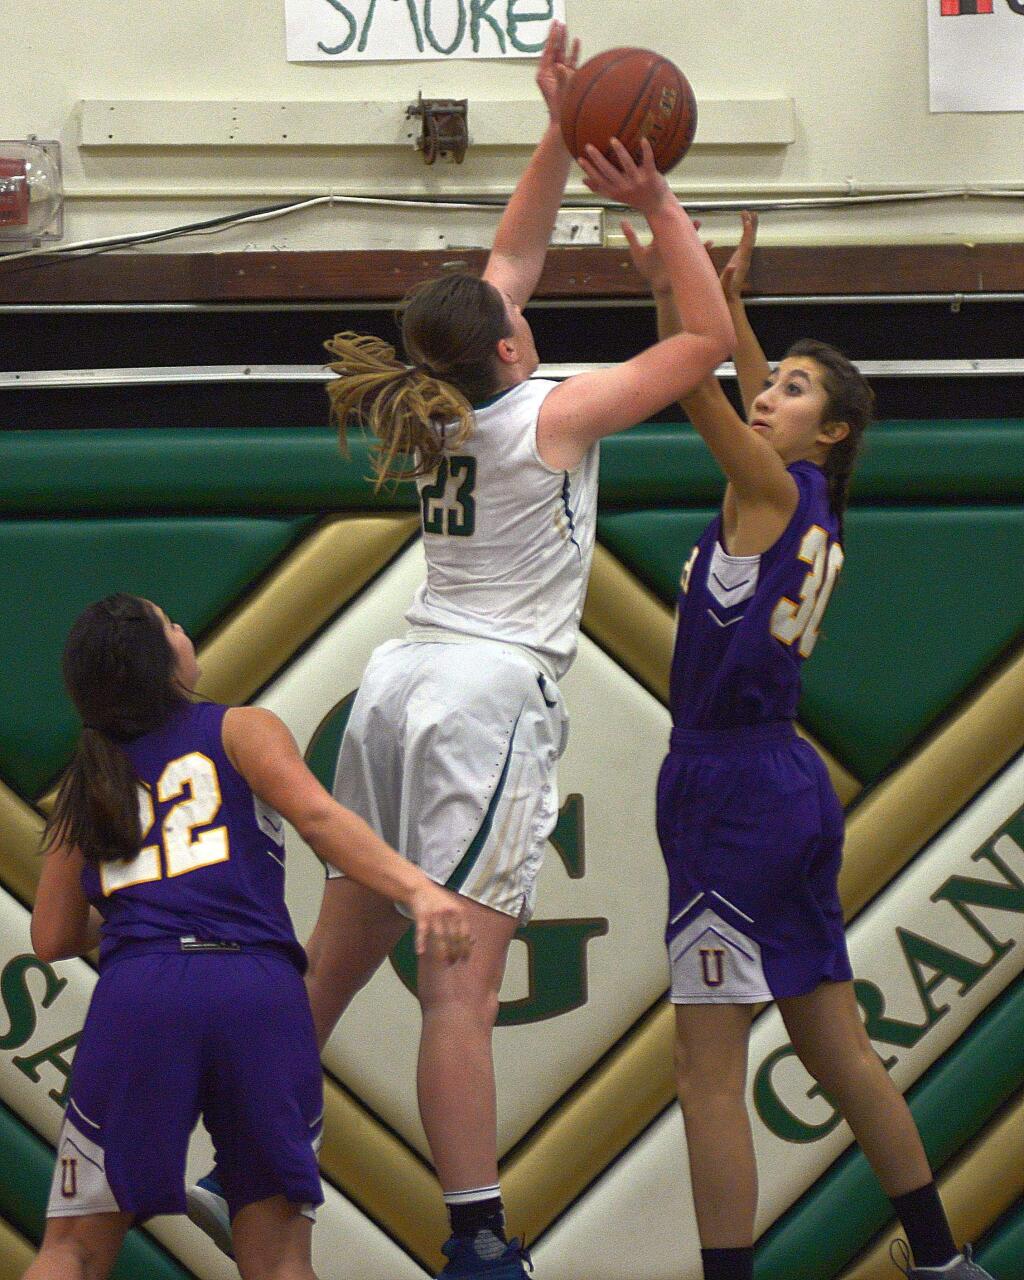 SUMNER FOWLER/FOR THE ARGUS-COURIERCasa Grande's Mia Cain shoots over Ukiah defender Valentina Evans in a NorthBay League game won by Ukiah.